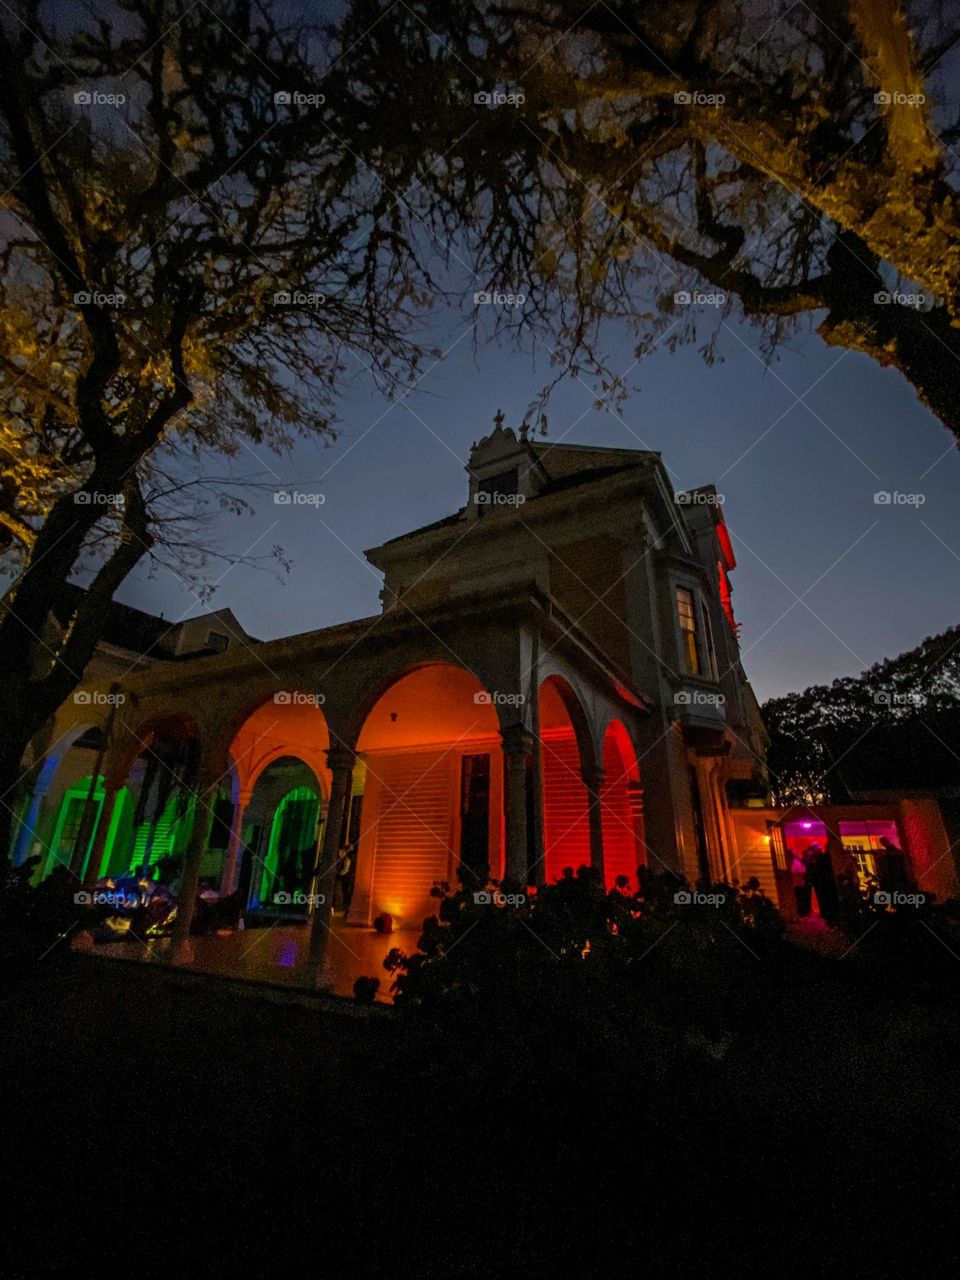 Spooky season mission - a haunted mansion looking scary.  Framed by trees and lit up, eerie noises filling the air . 